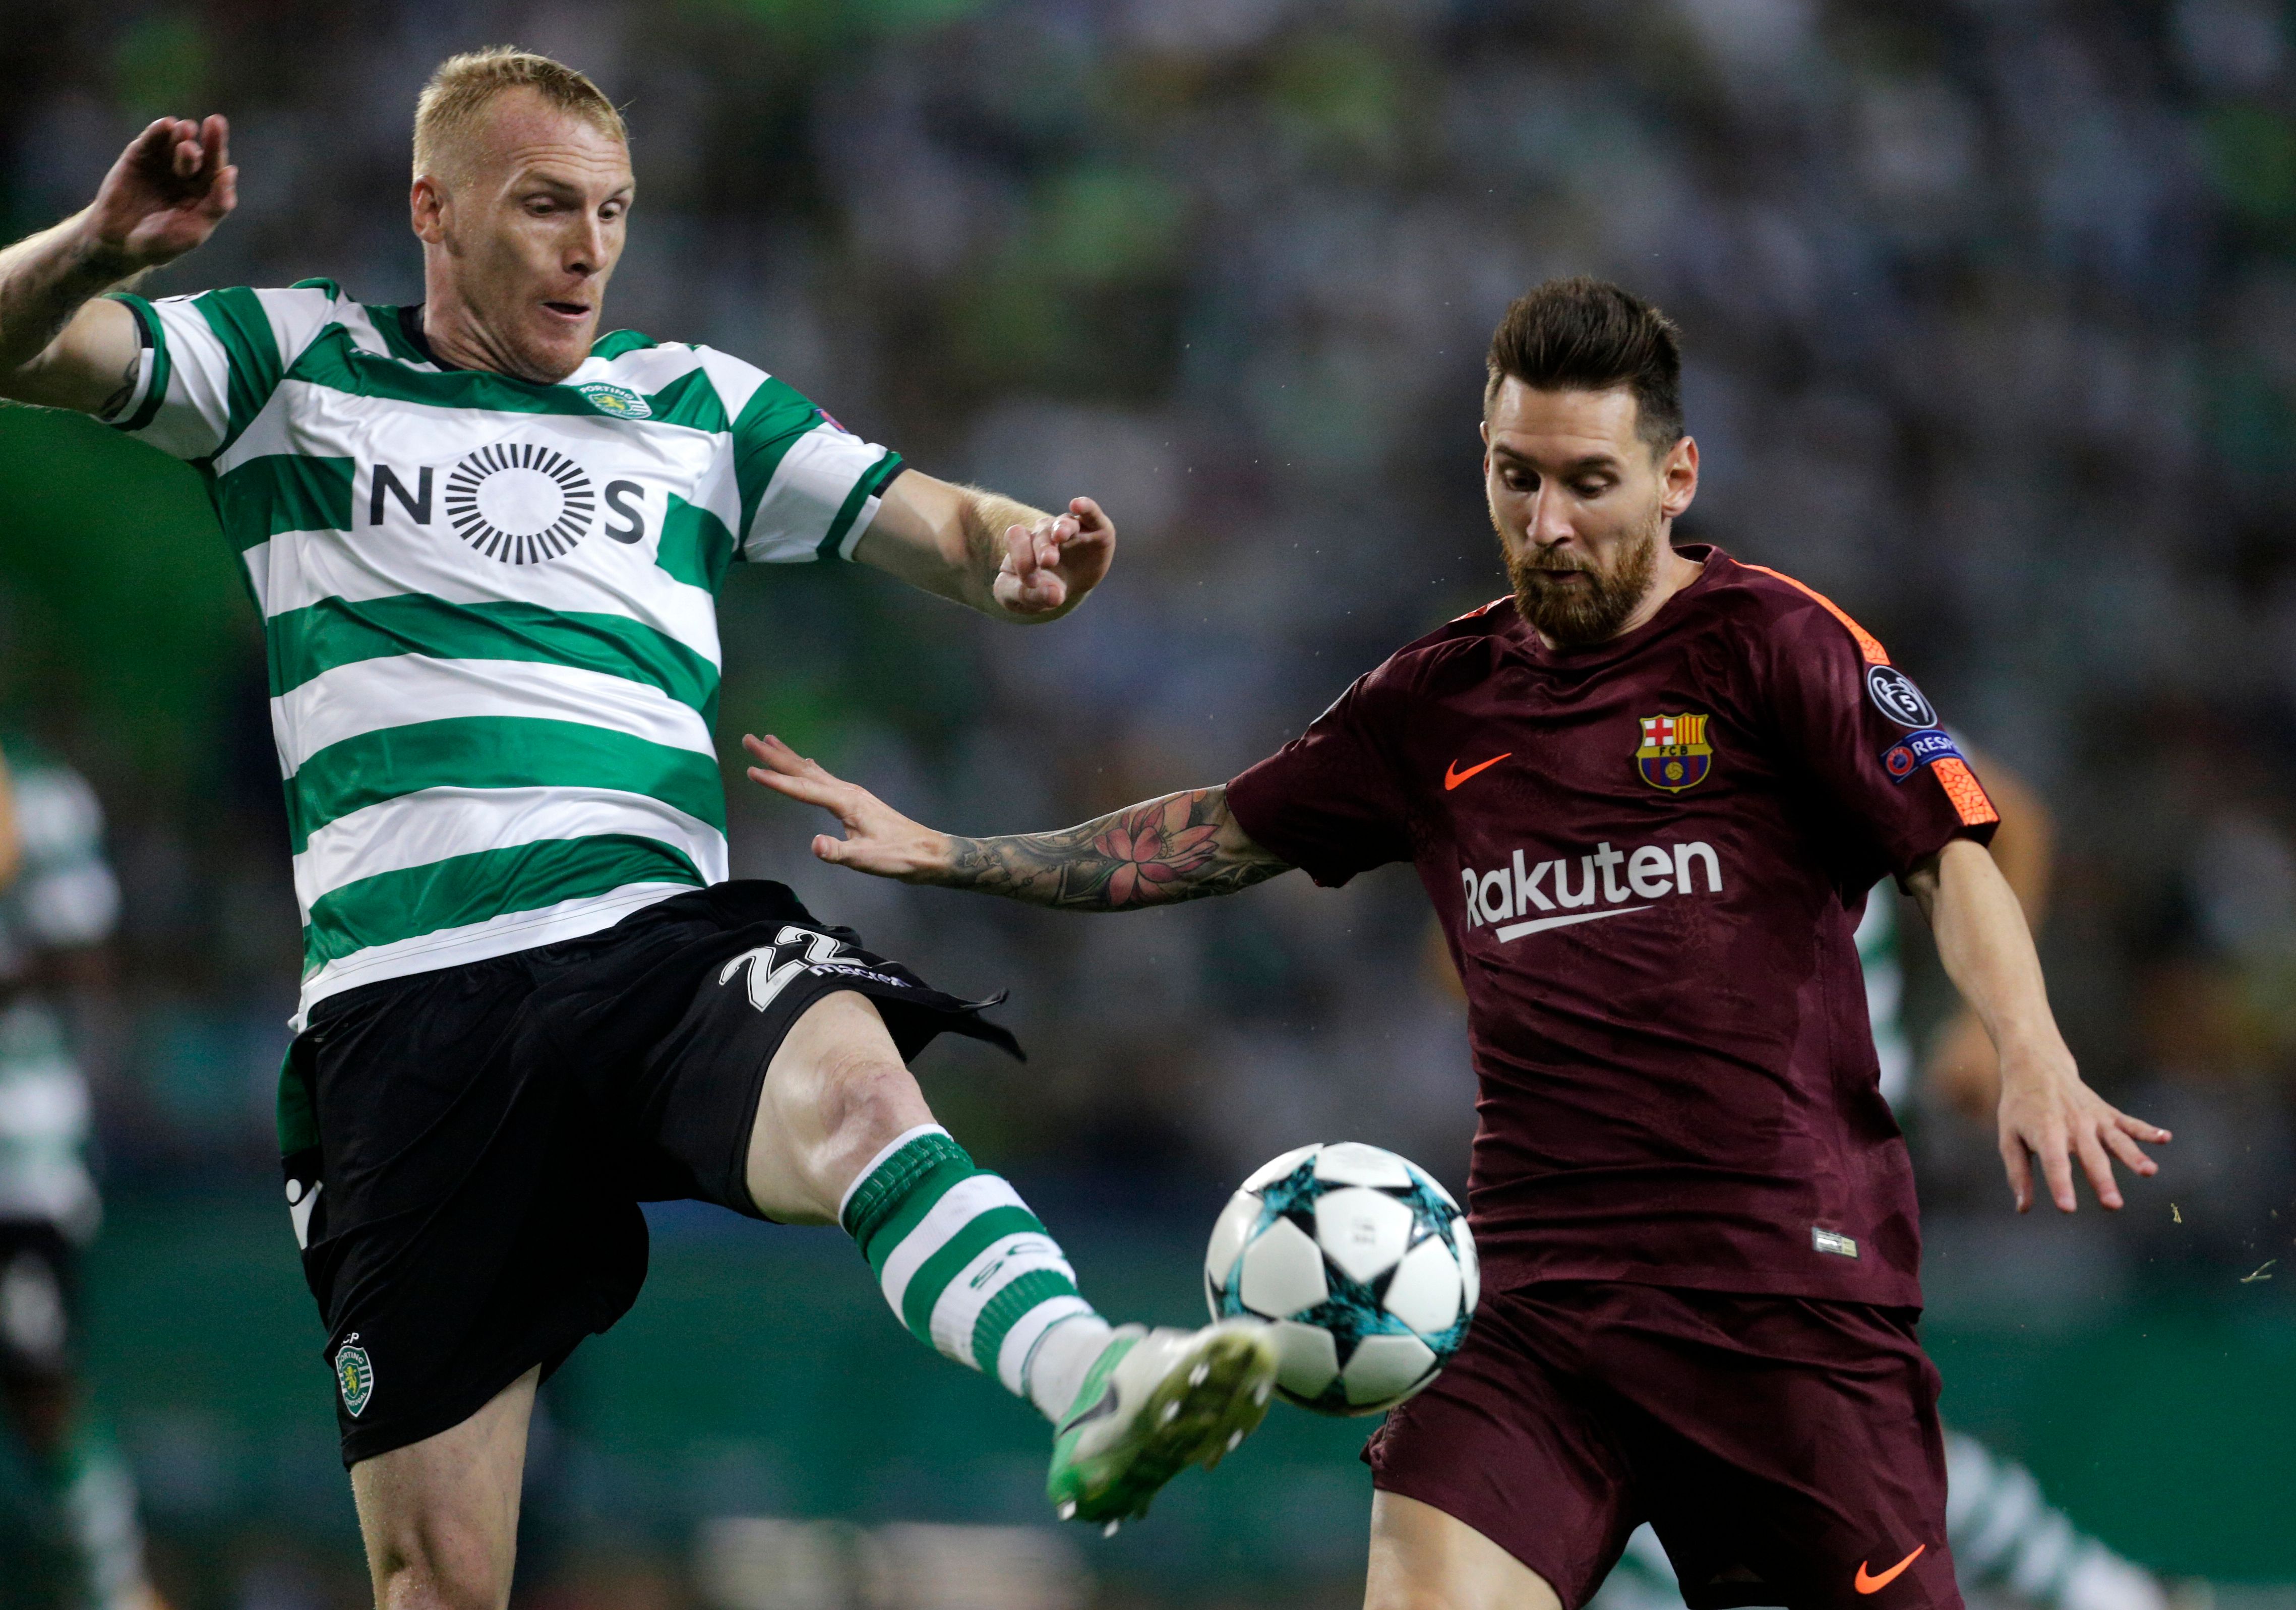 Barcelonas Argentinian forward Lionel Messi vies with Sportings French defender Jeremy Mathieu during the UEFA Champions League Group D football match Sporting CP vs FC Barcelona at the Jose Alvalade stadium in Lisbon on September 27, 2017. / AFP PHOTO / JOSE MANUEL RIBEIRO        (Photo credit should read JOSE MANUEL RIBEIRO/AFP/Getty Images)